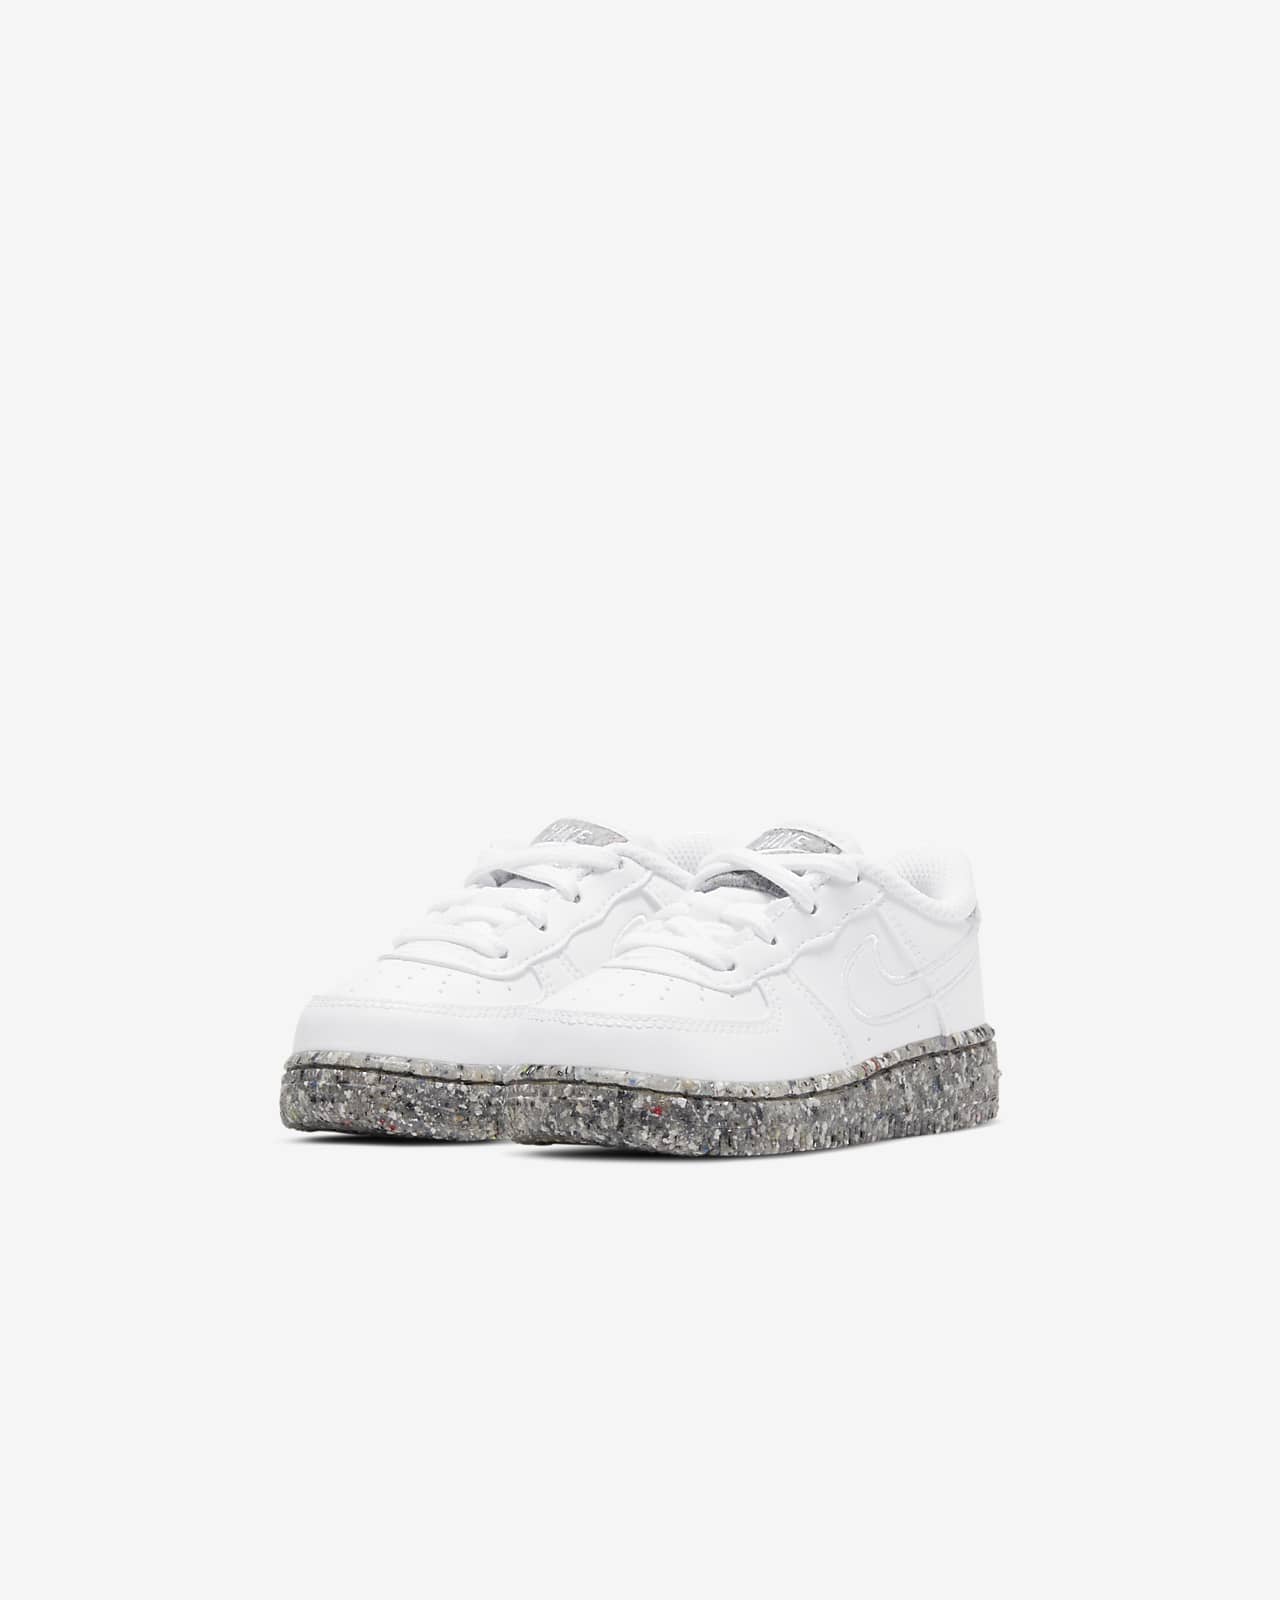 nike air force 1 toddler shoes